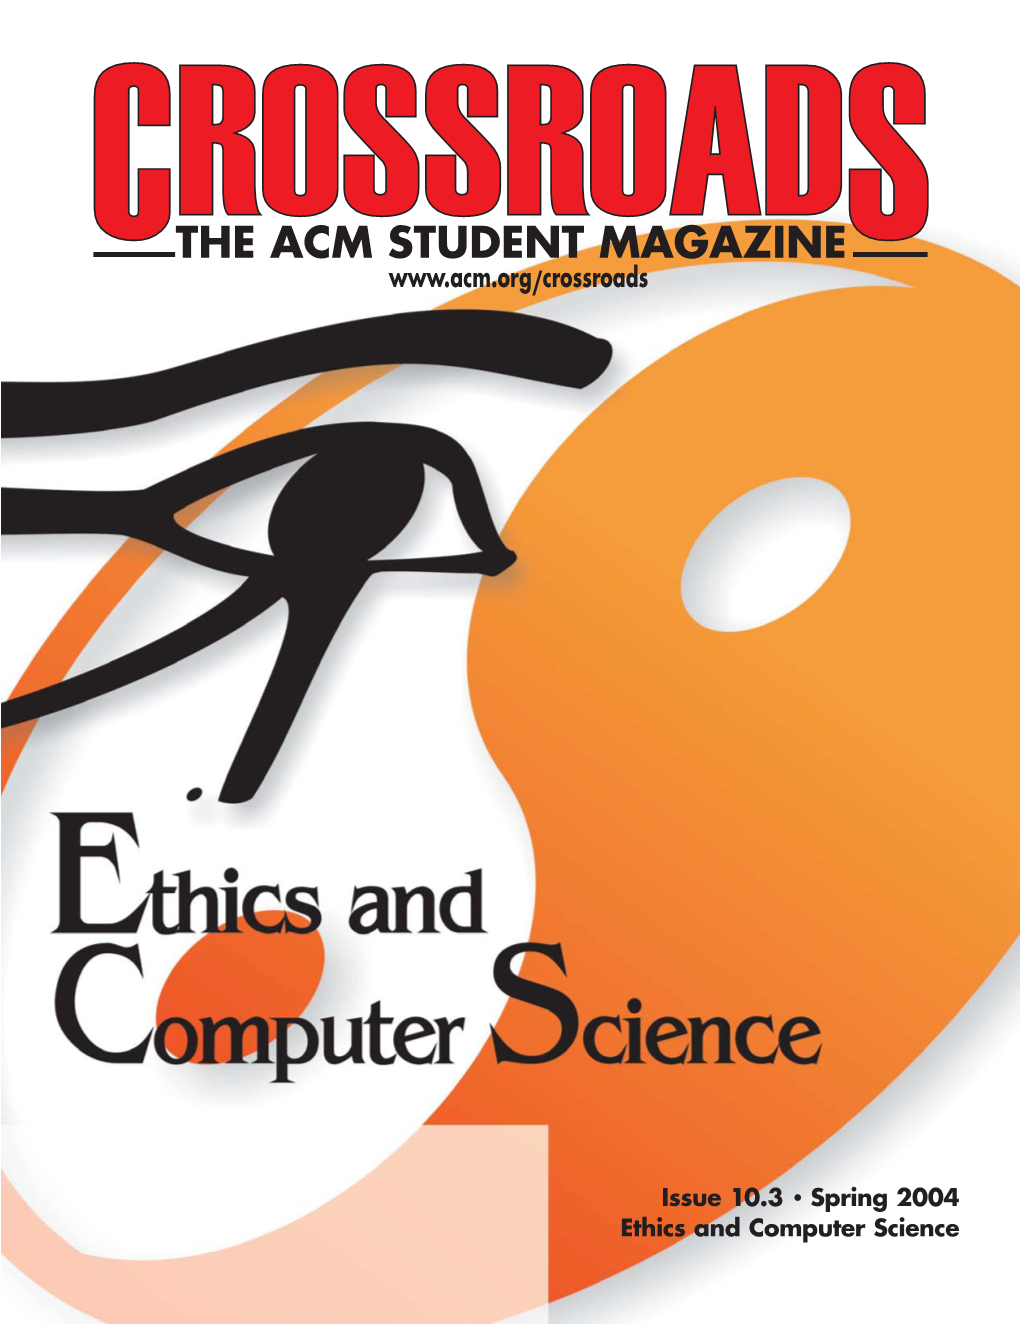 Issue 10.3 • Spring 2004 Ethics and Computer Science